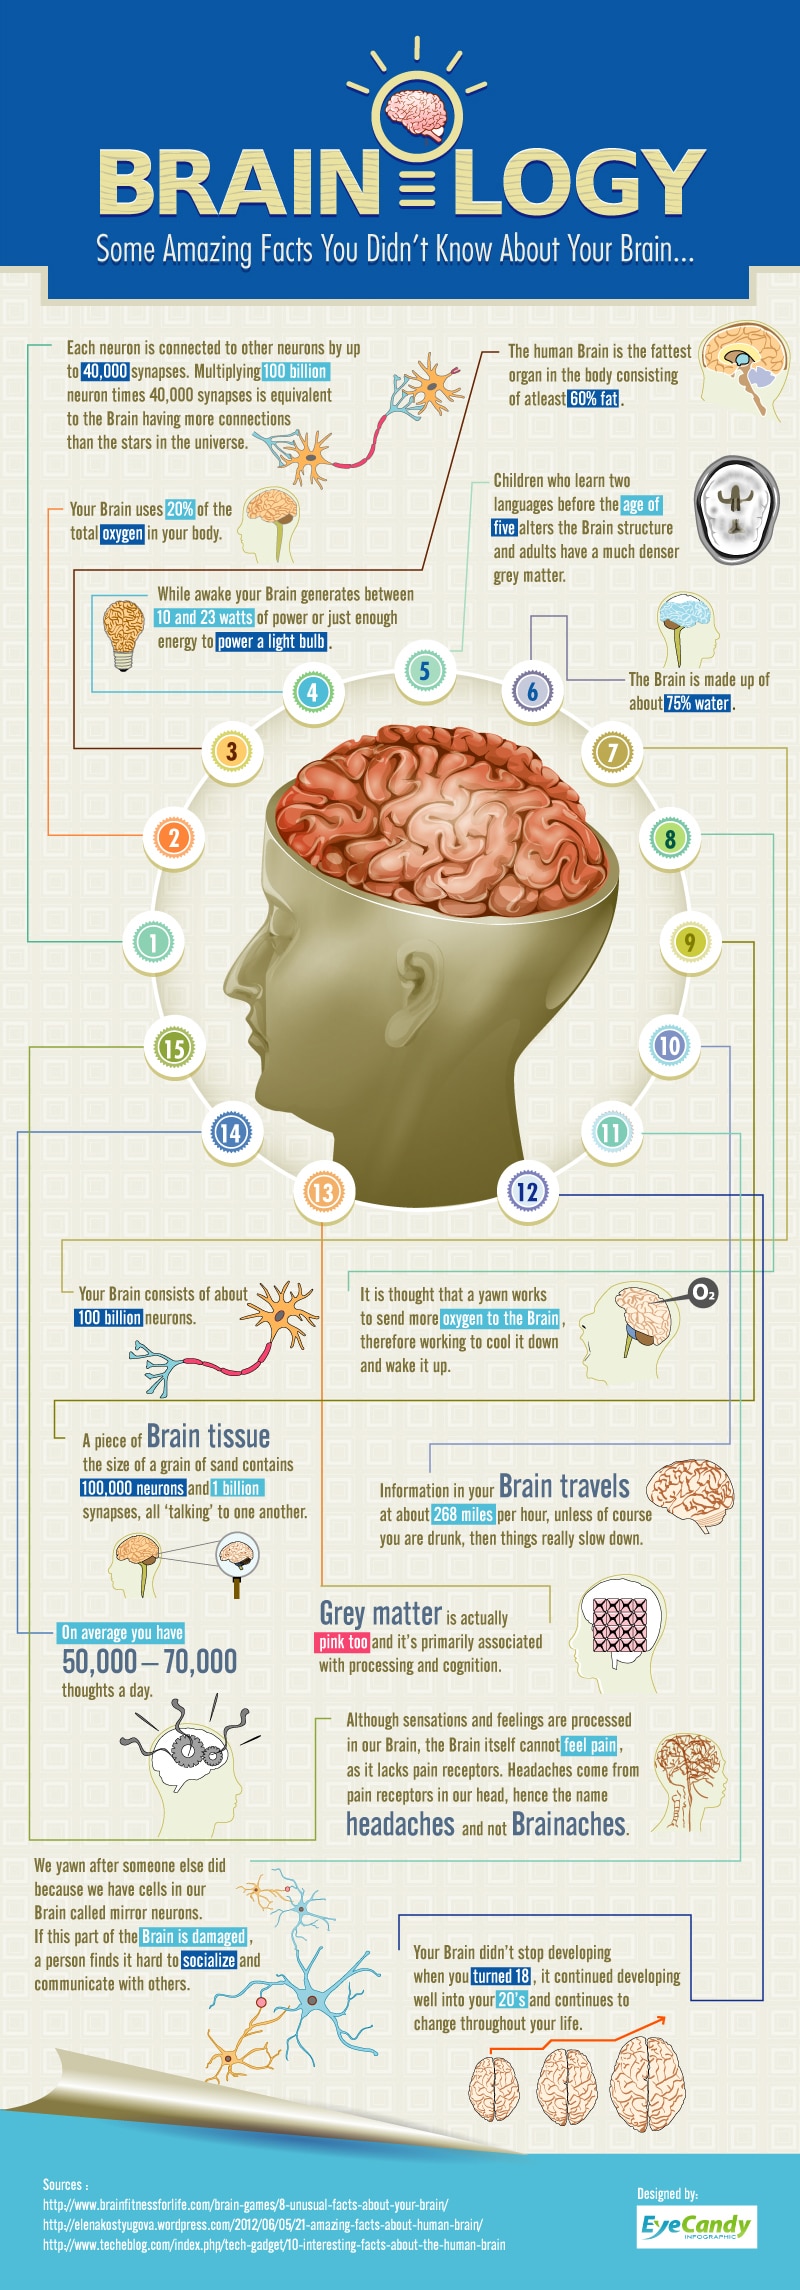 Brainology: 15 Intriguing Facts About Your Brain [Infographic]